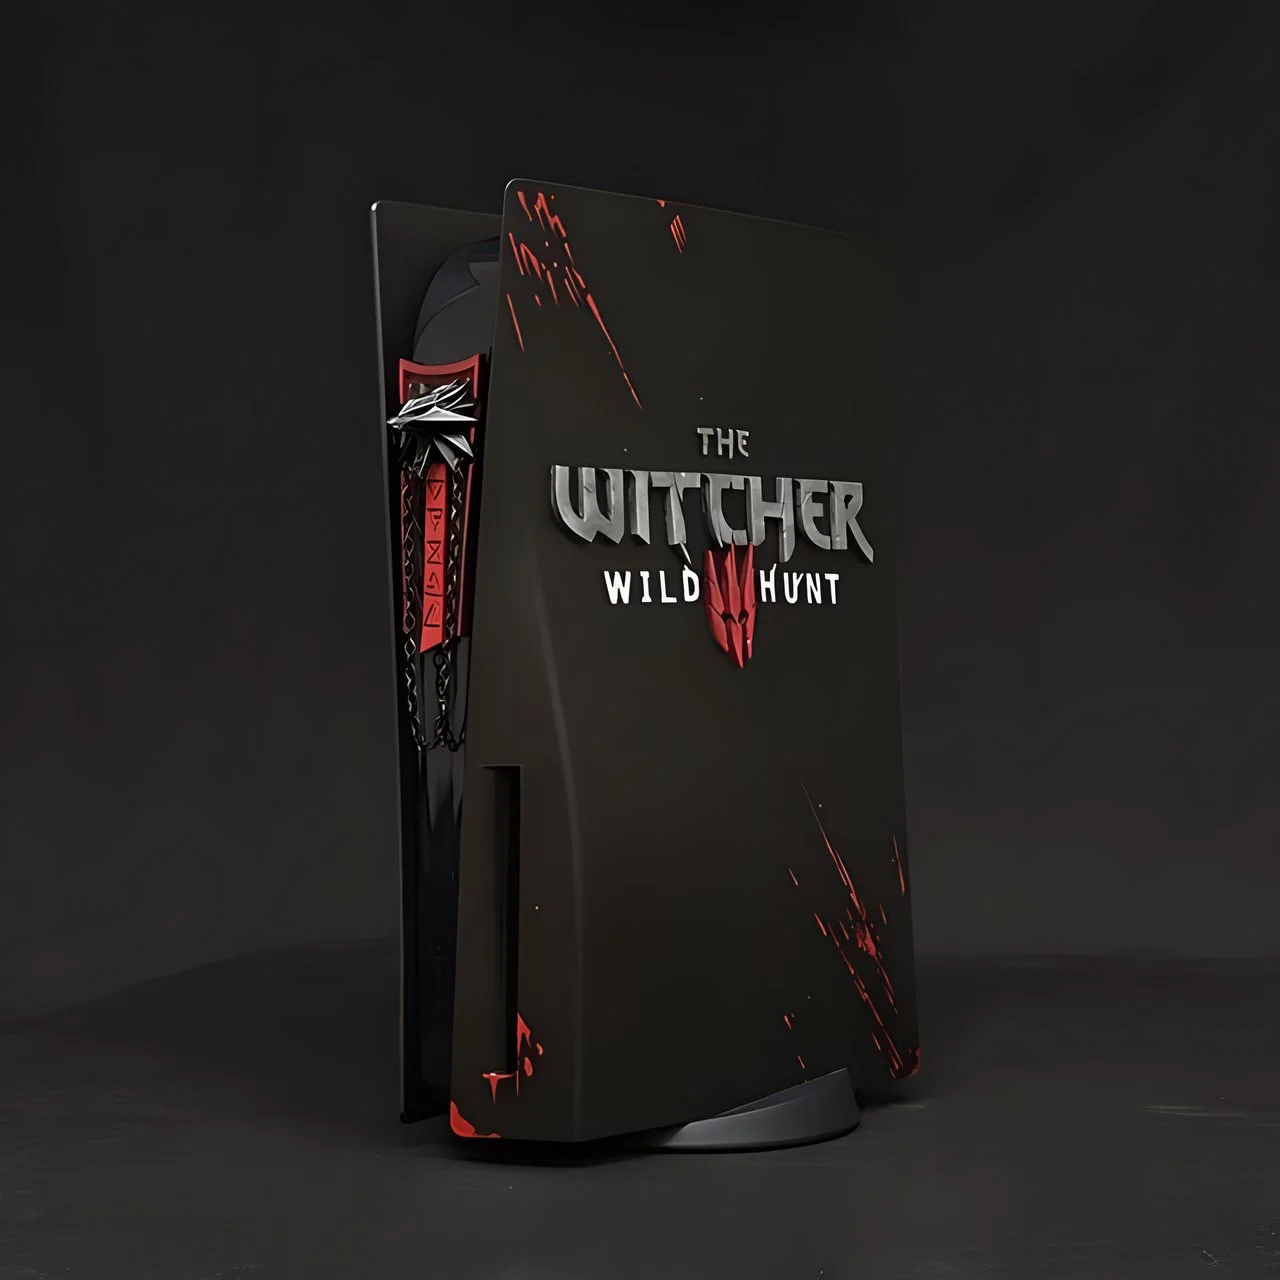 The gamer showed a custom PlayStation 5, made in the style of the Witcher